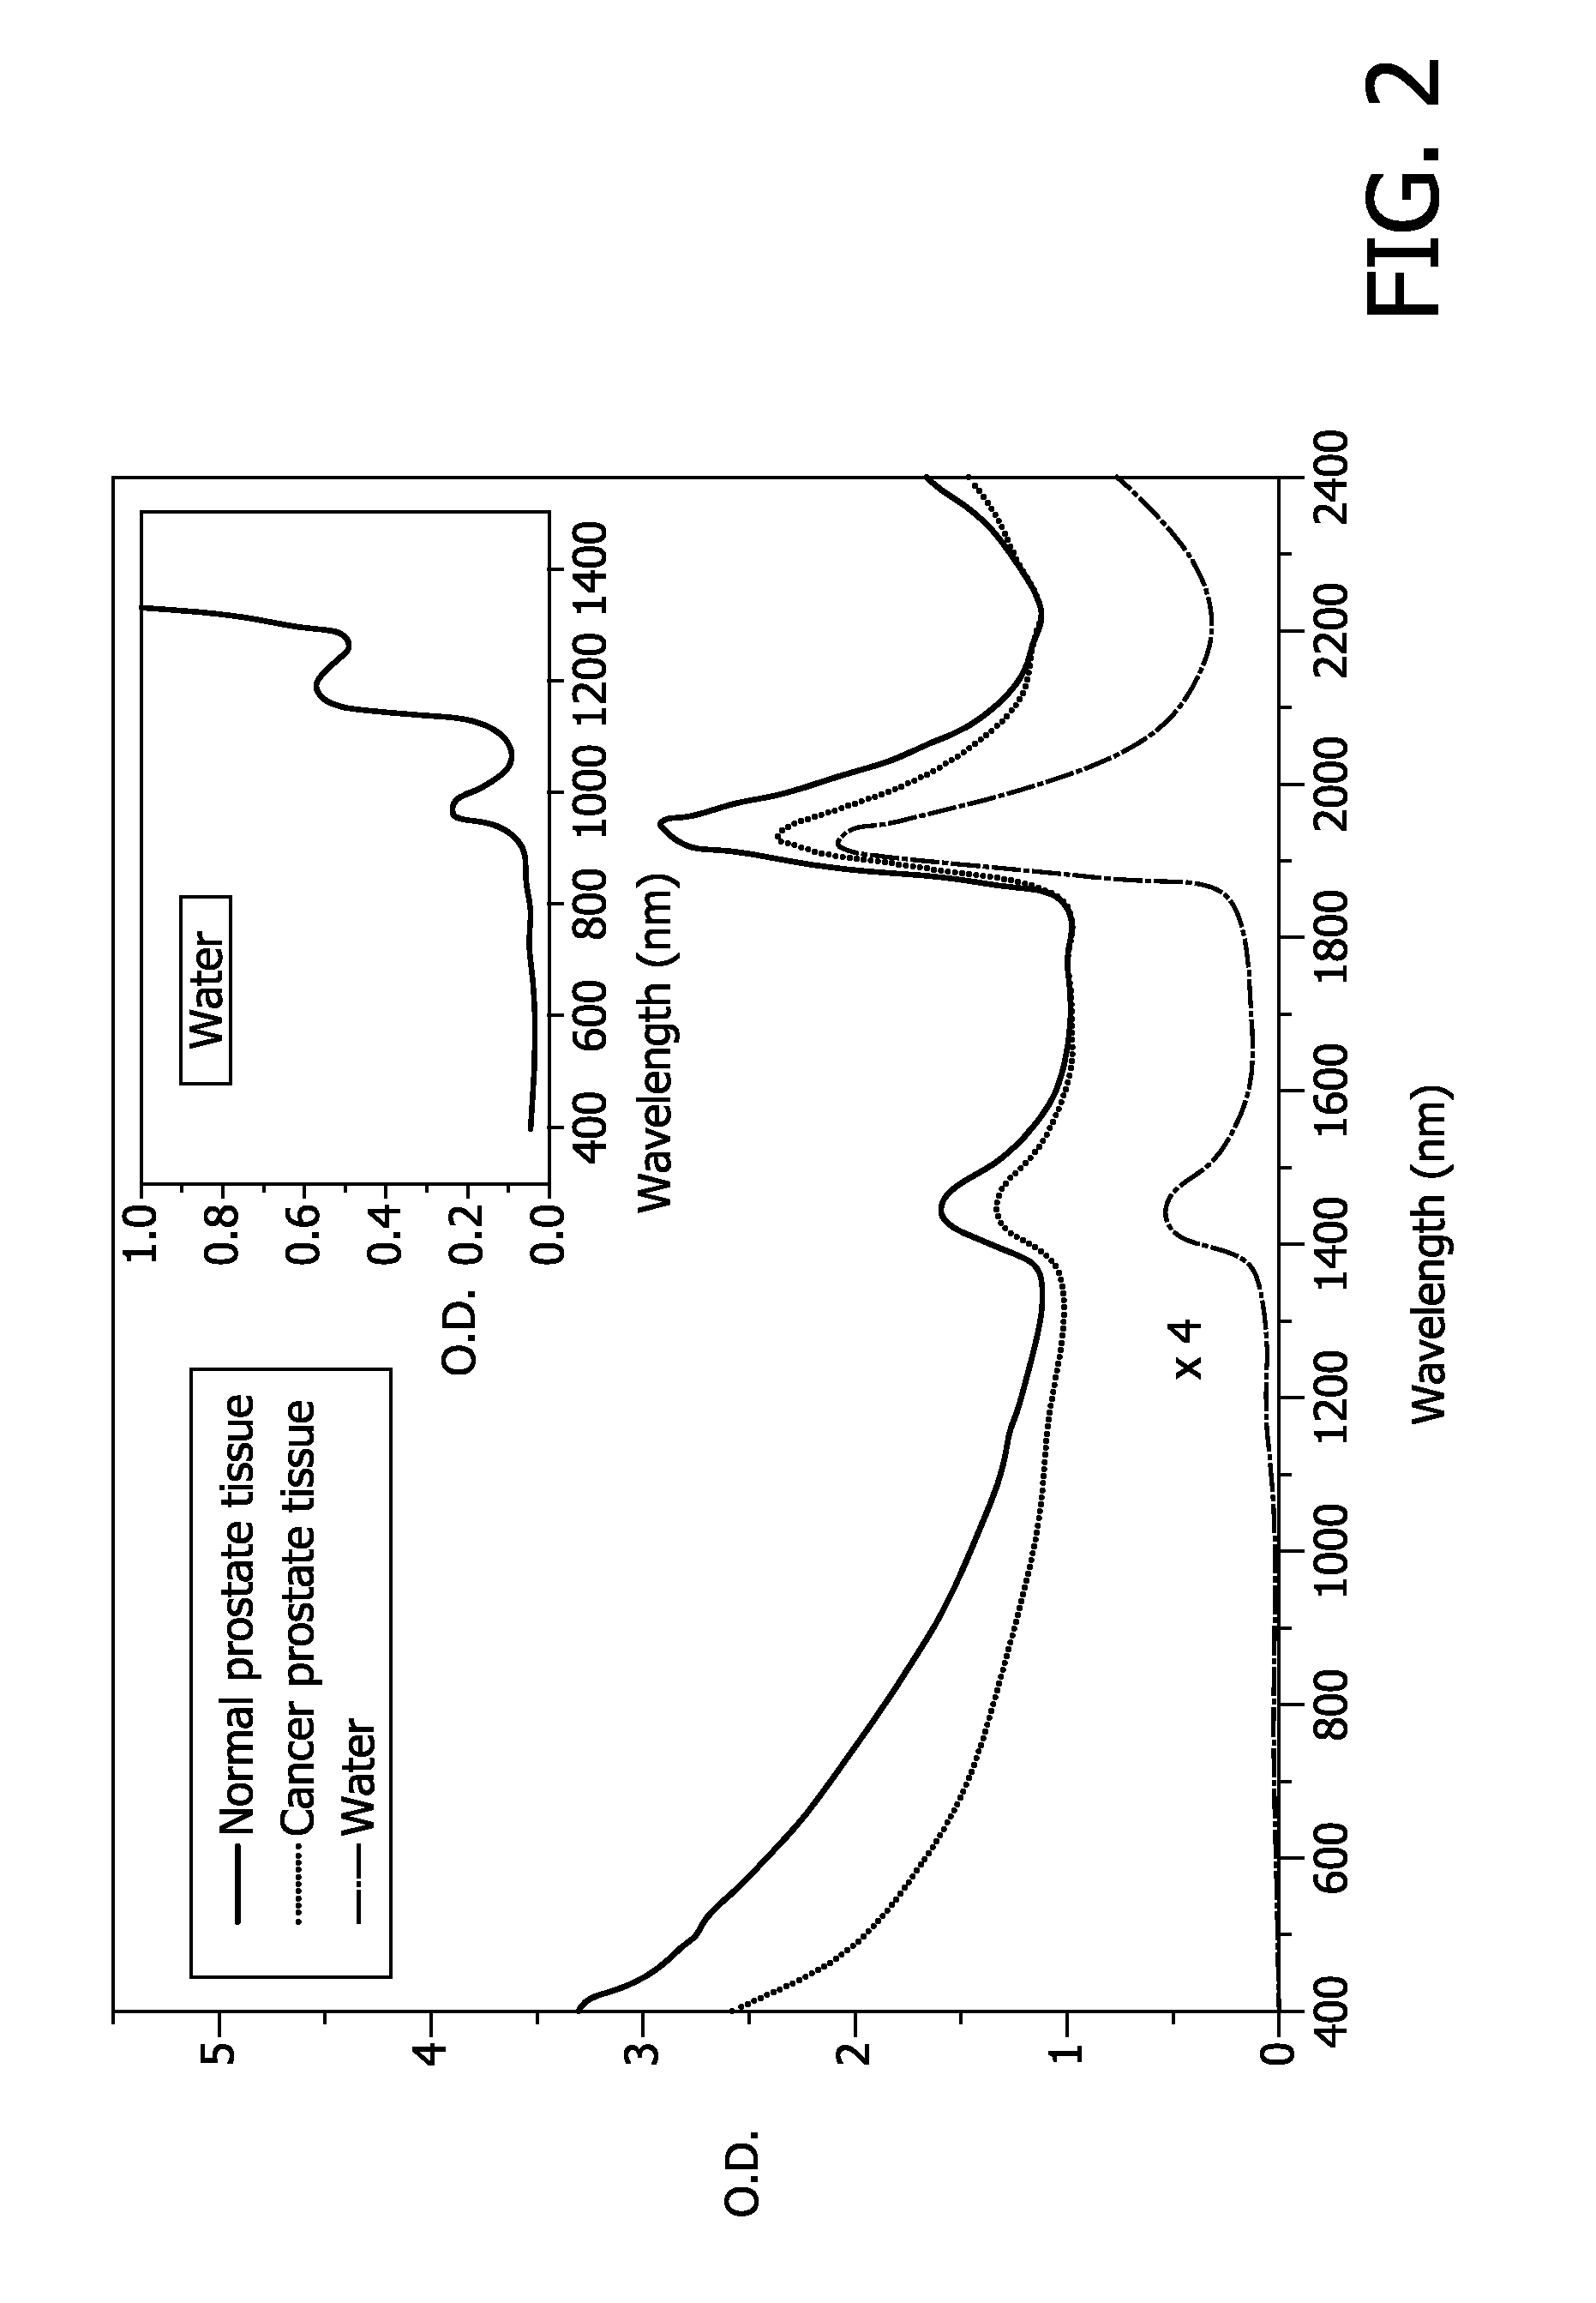 System, device, method, computer-readable medium, and use for in vivo imaging of tissue in an anatomical structure